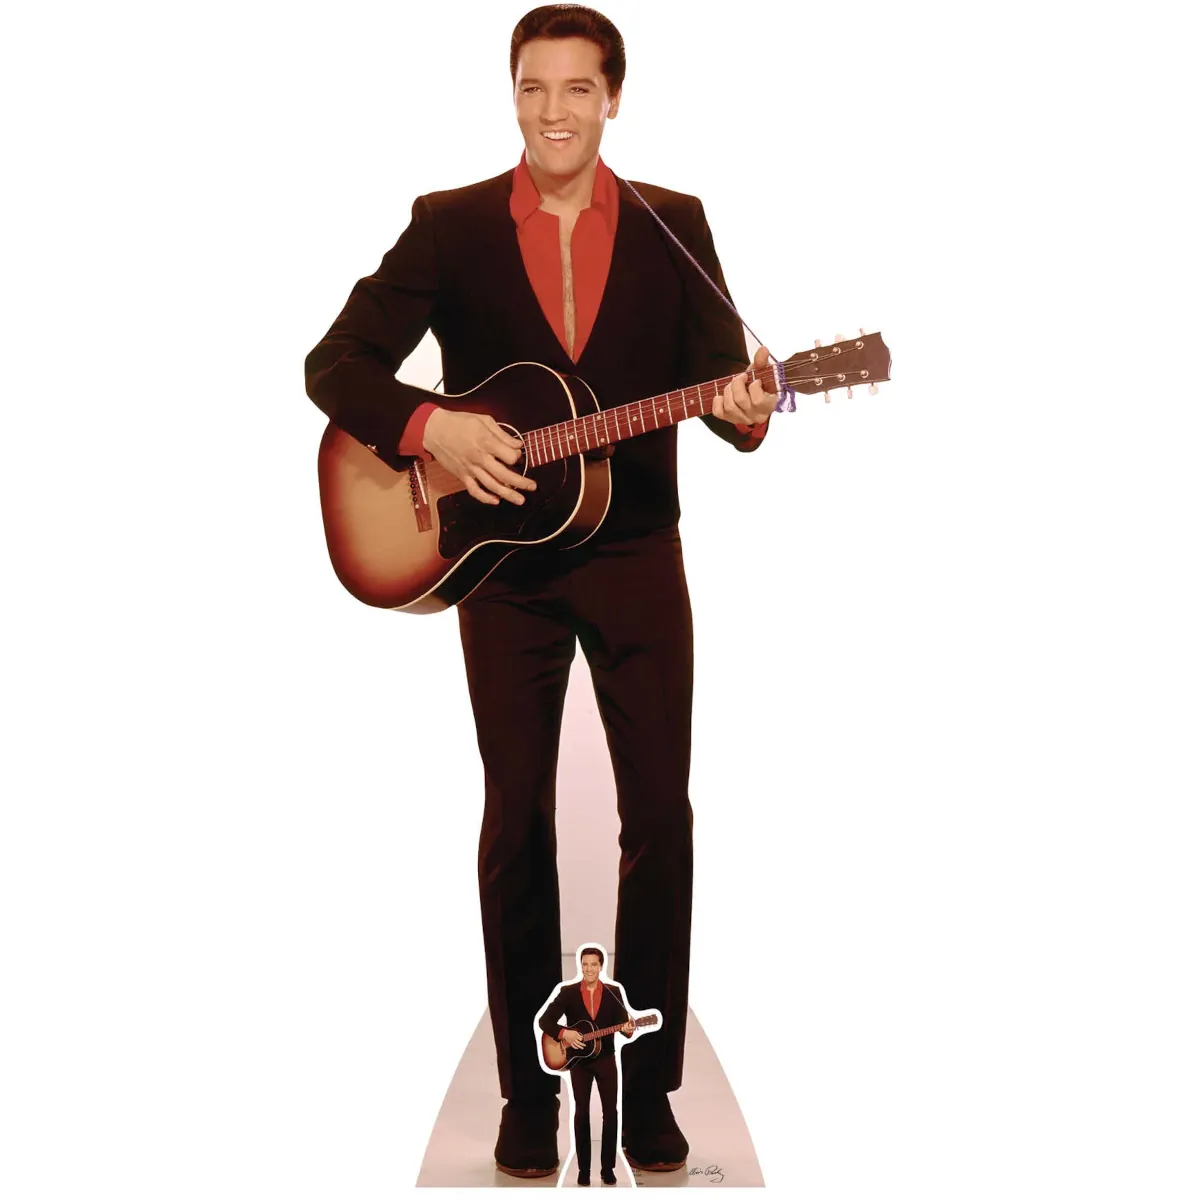 SC241 Elvis Presley 'Red Shirt & Guitar' (American Singer) Official Lifesize + Mini Cardboard Cutout Standee Front